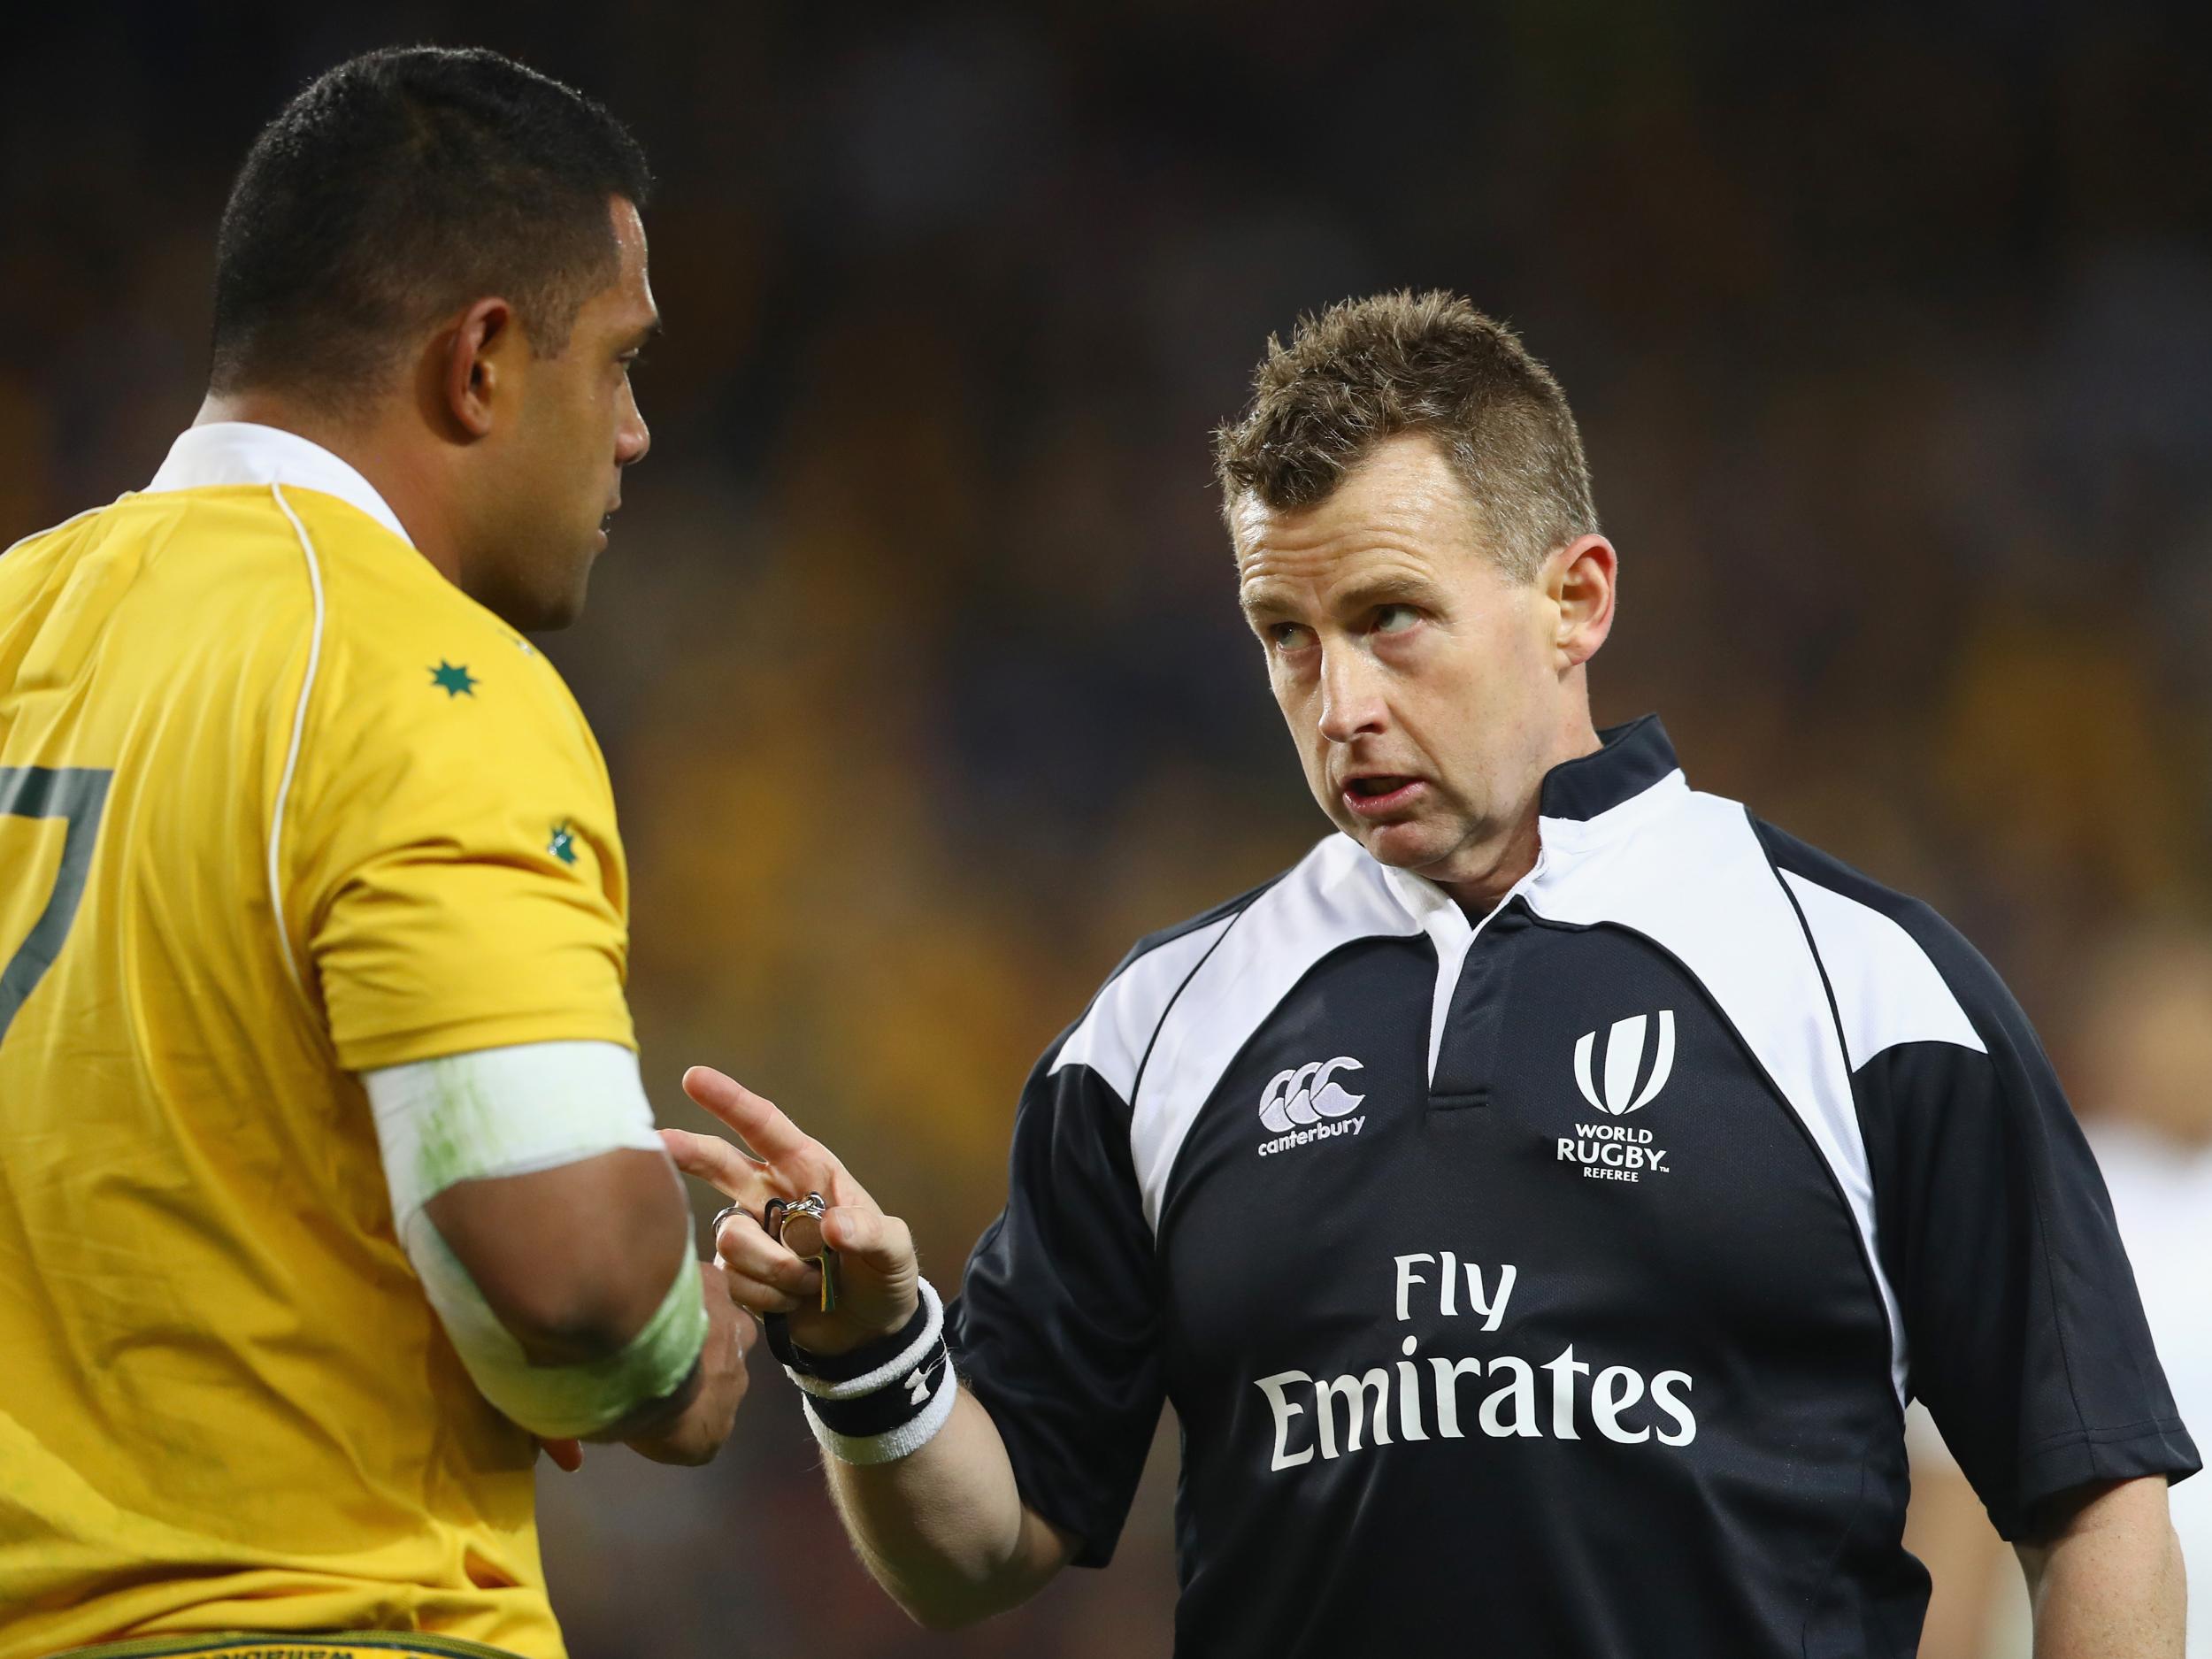 Owens refereed the 2015 World Cup final